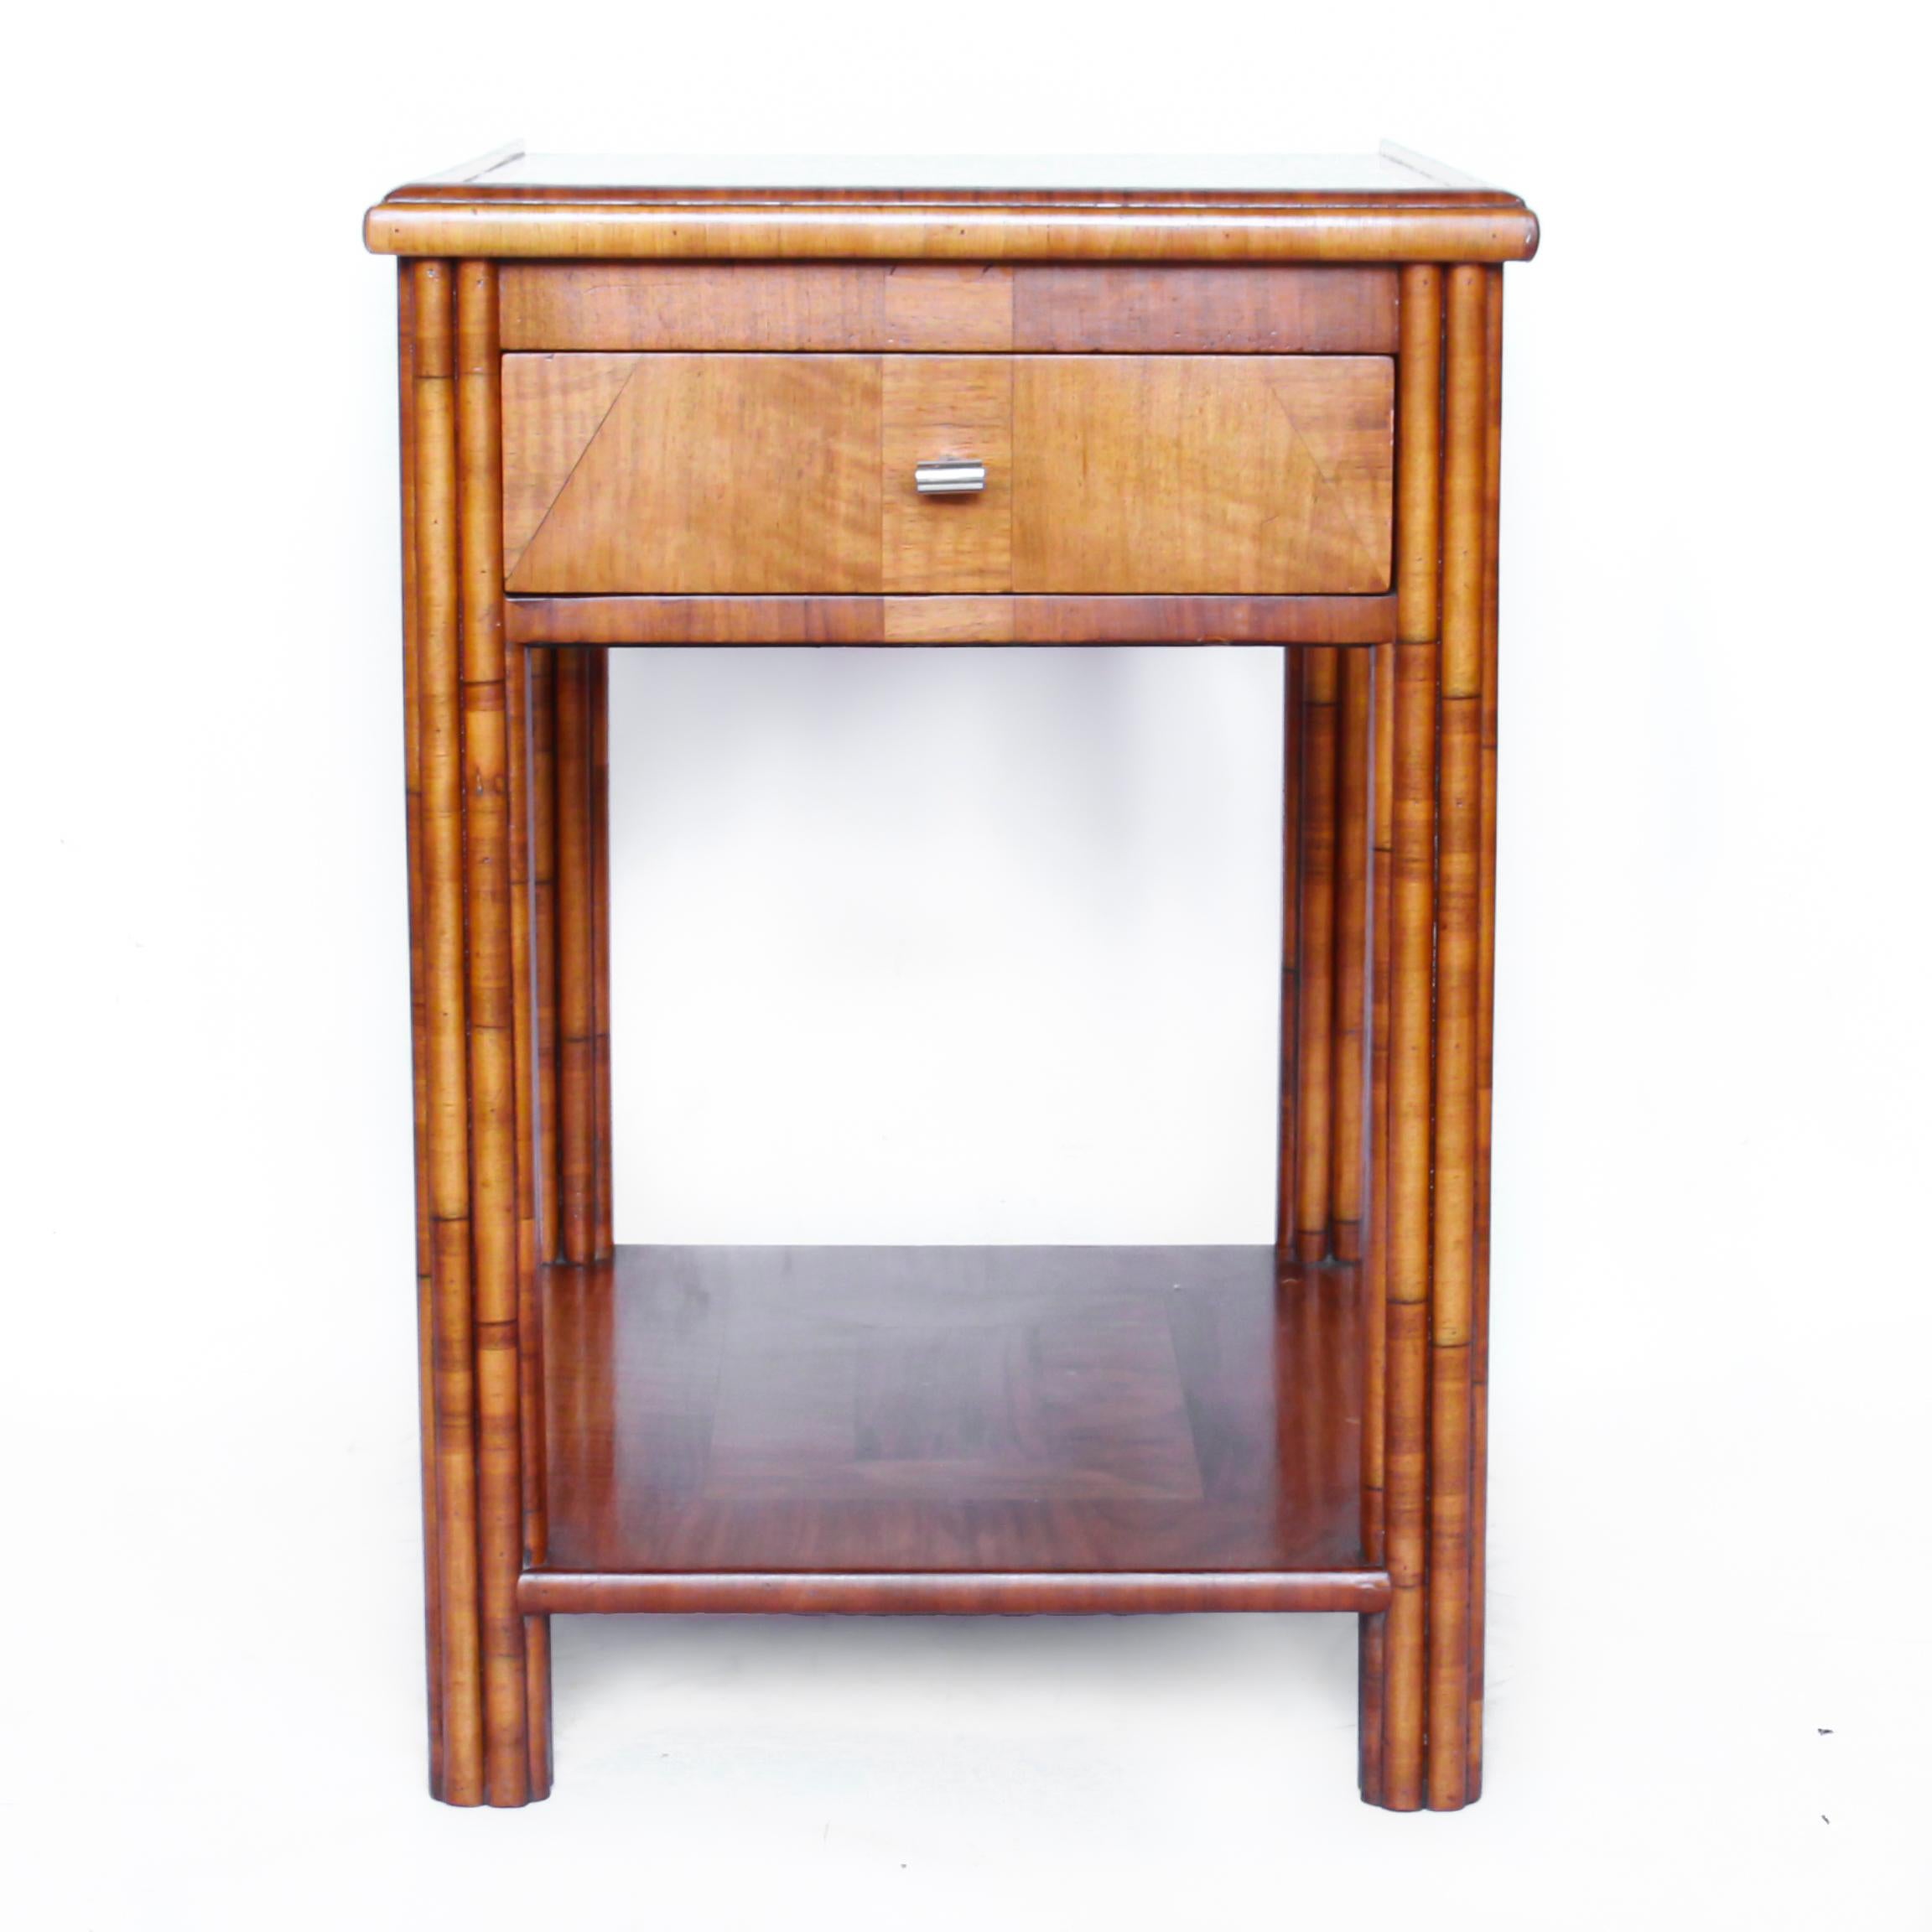 An Art Deco occasional table in walnut with veneered, reeded legs. Integral drawer and sliding tray. Original metal handle.

Dimensions: H 66cm, W 62cm, D 46cm

Origin: English

Date: circa 1930

Item no: 070120.
 